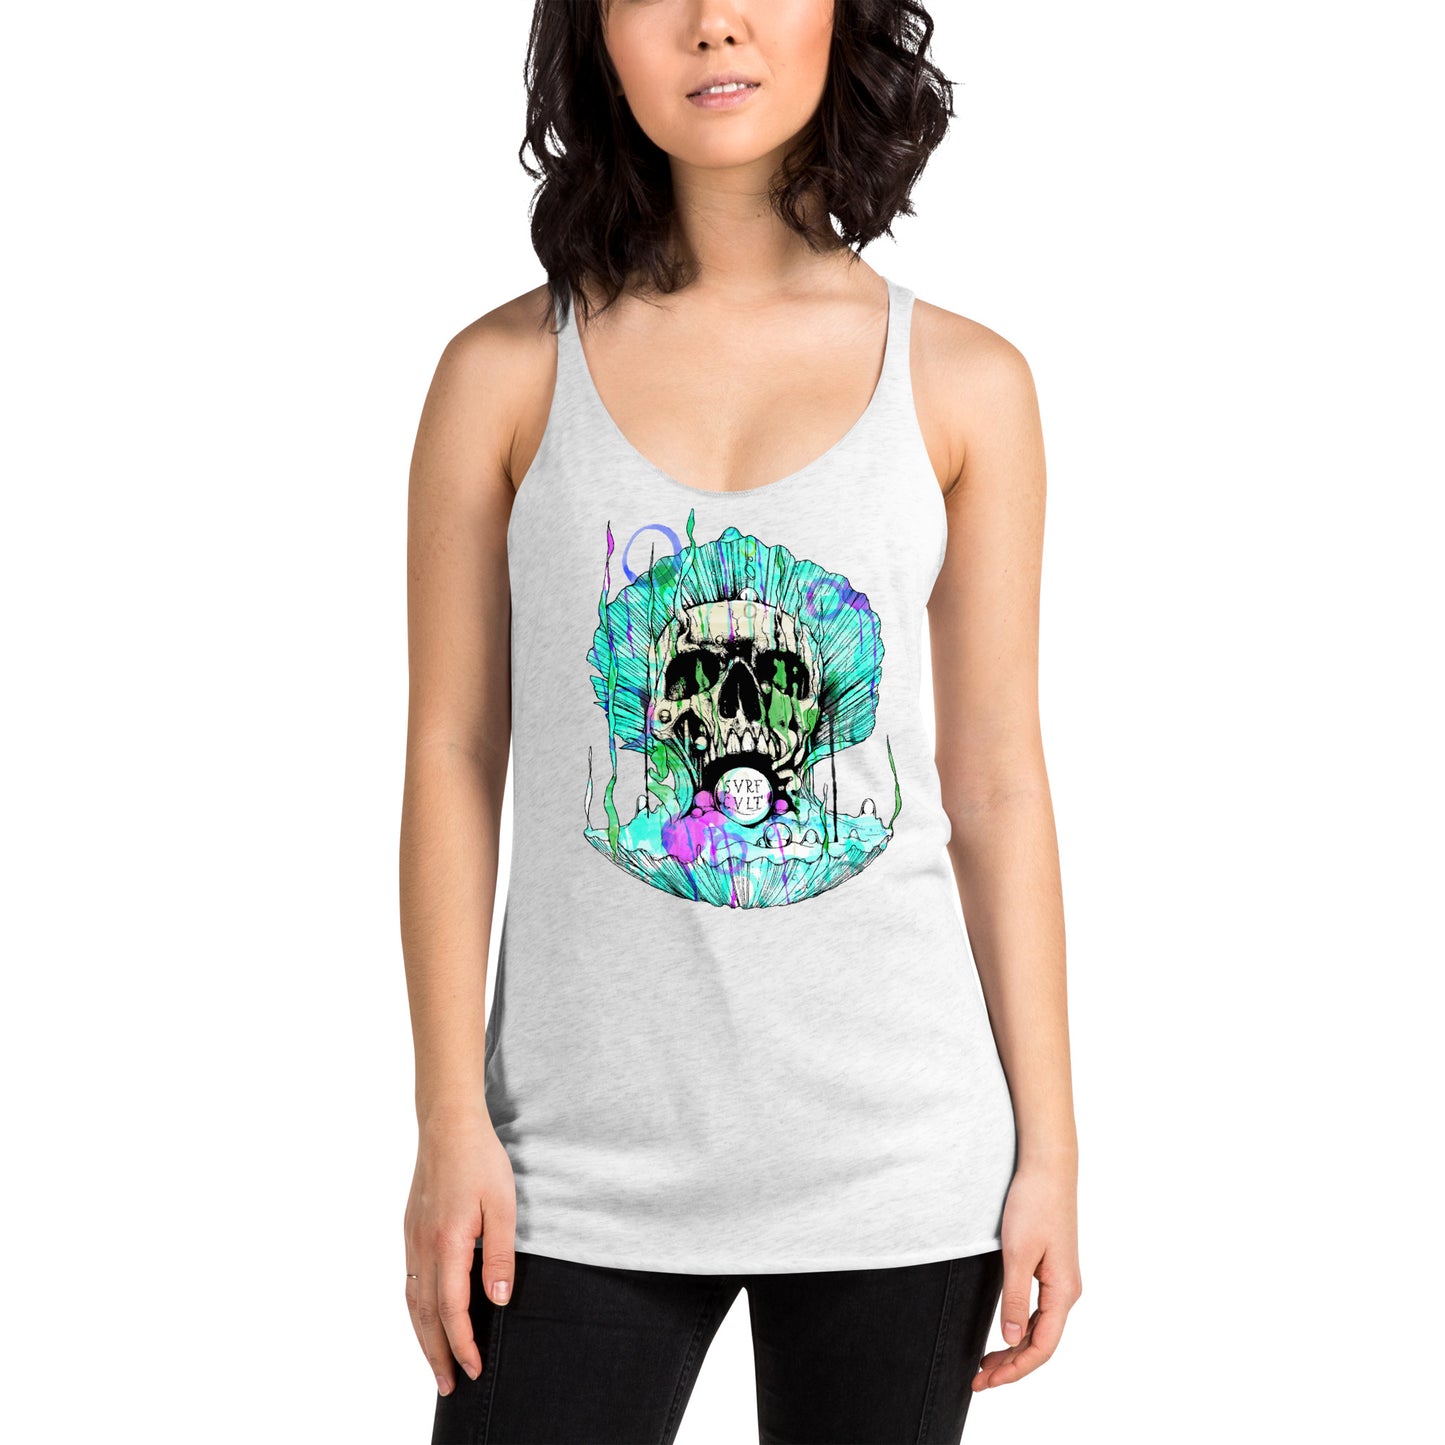 Pearls from the Deep Women's Racerback Tank